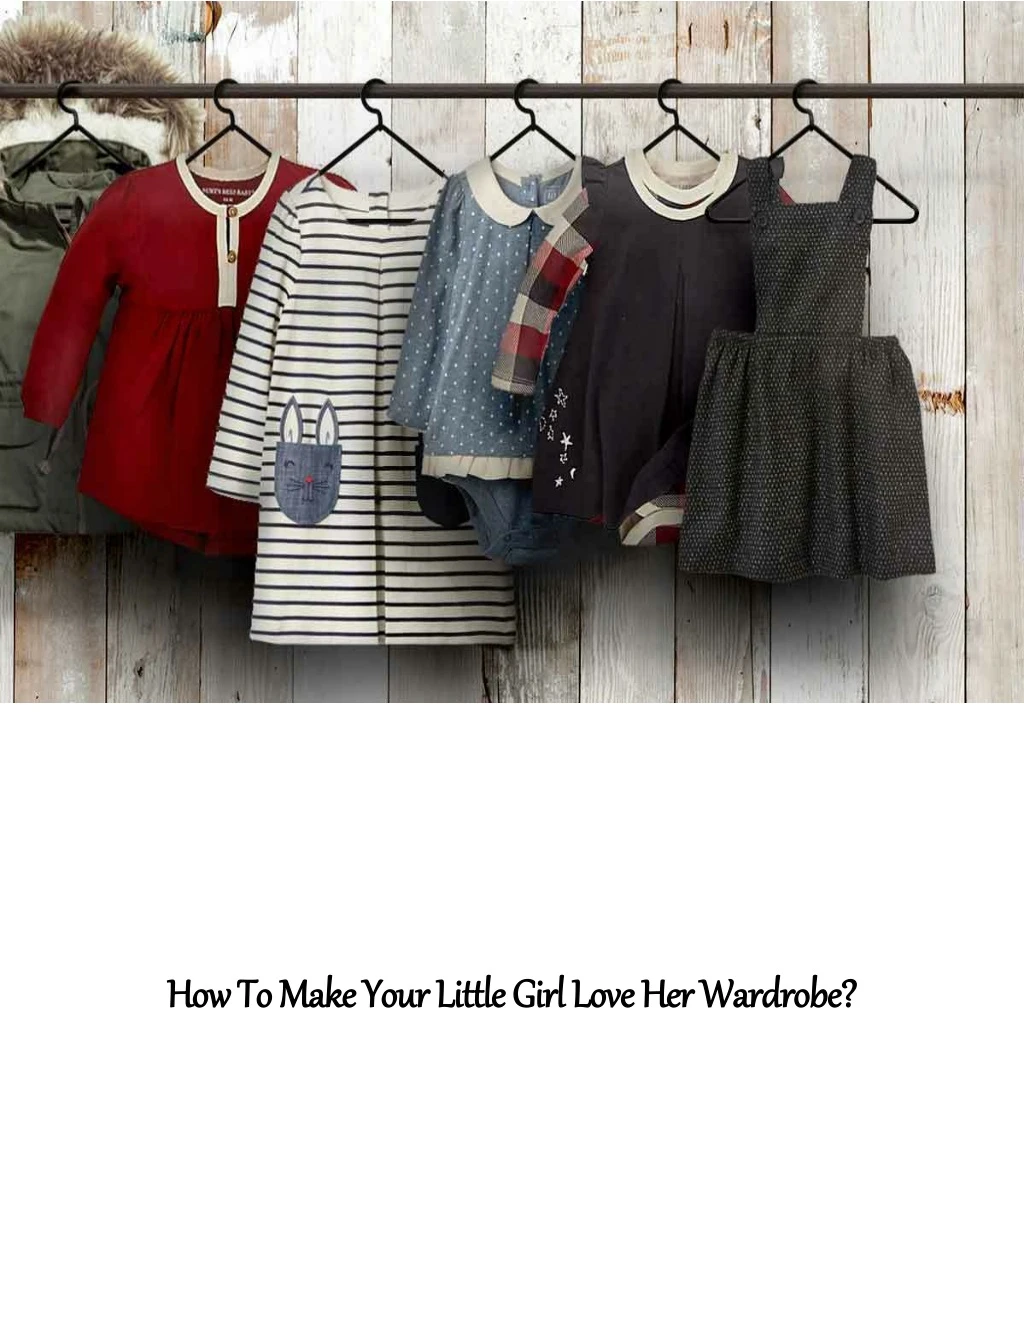 how to make your little girl love her wardrobe